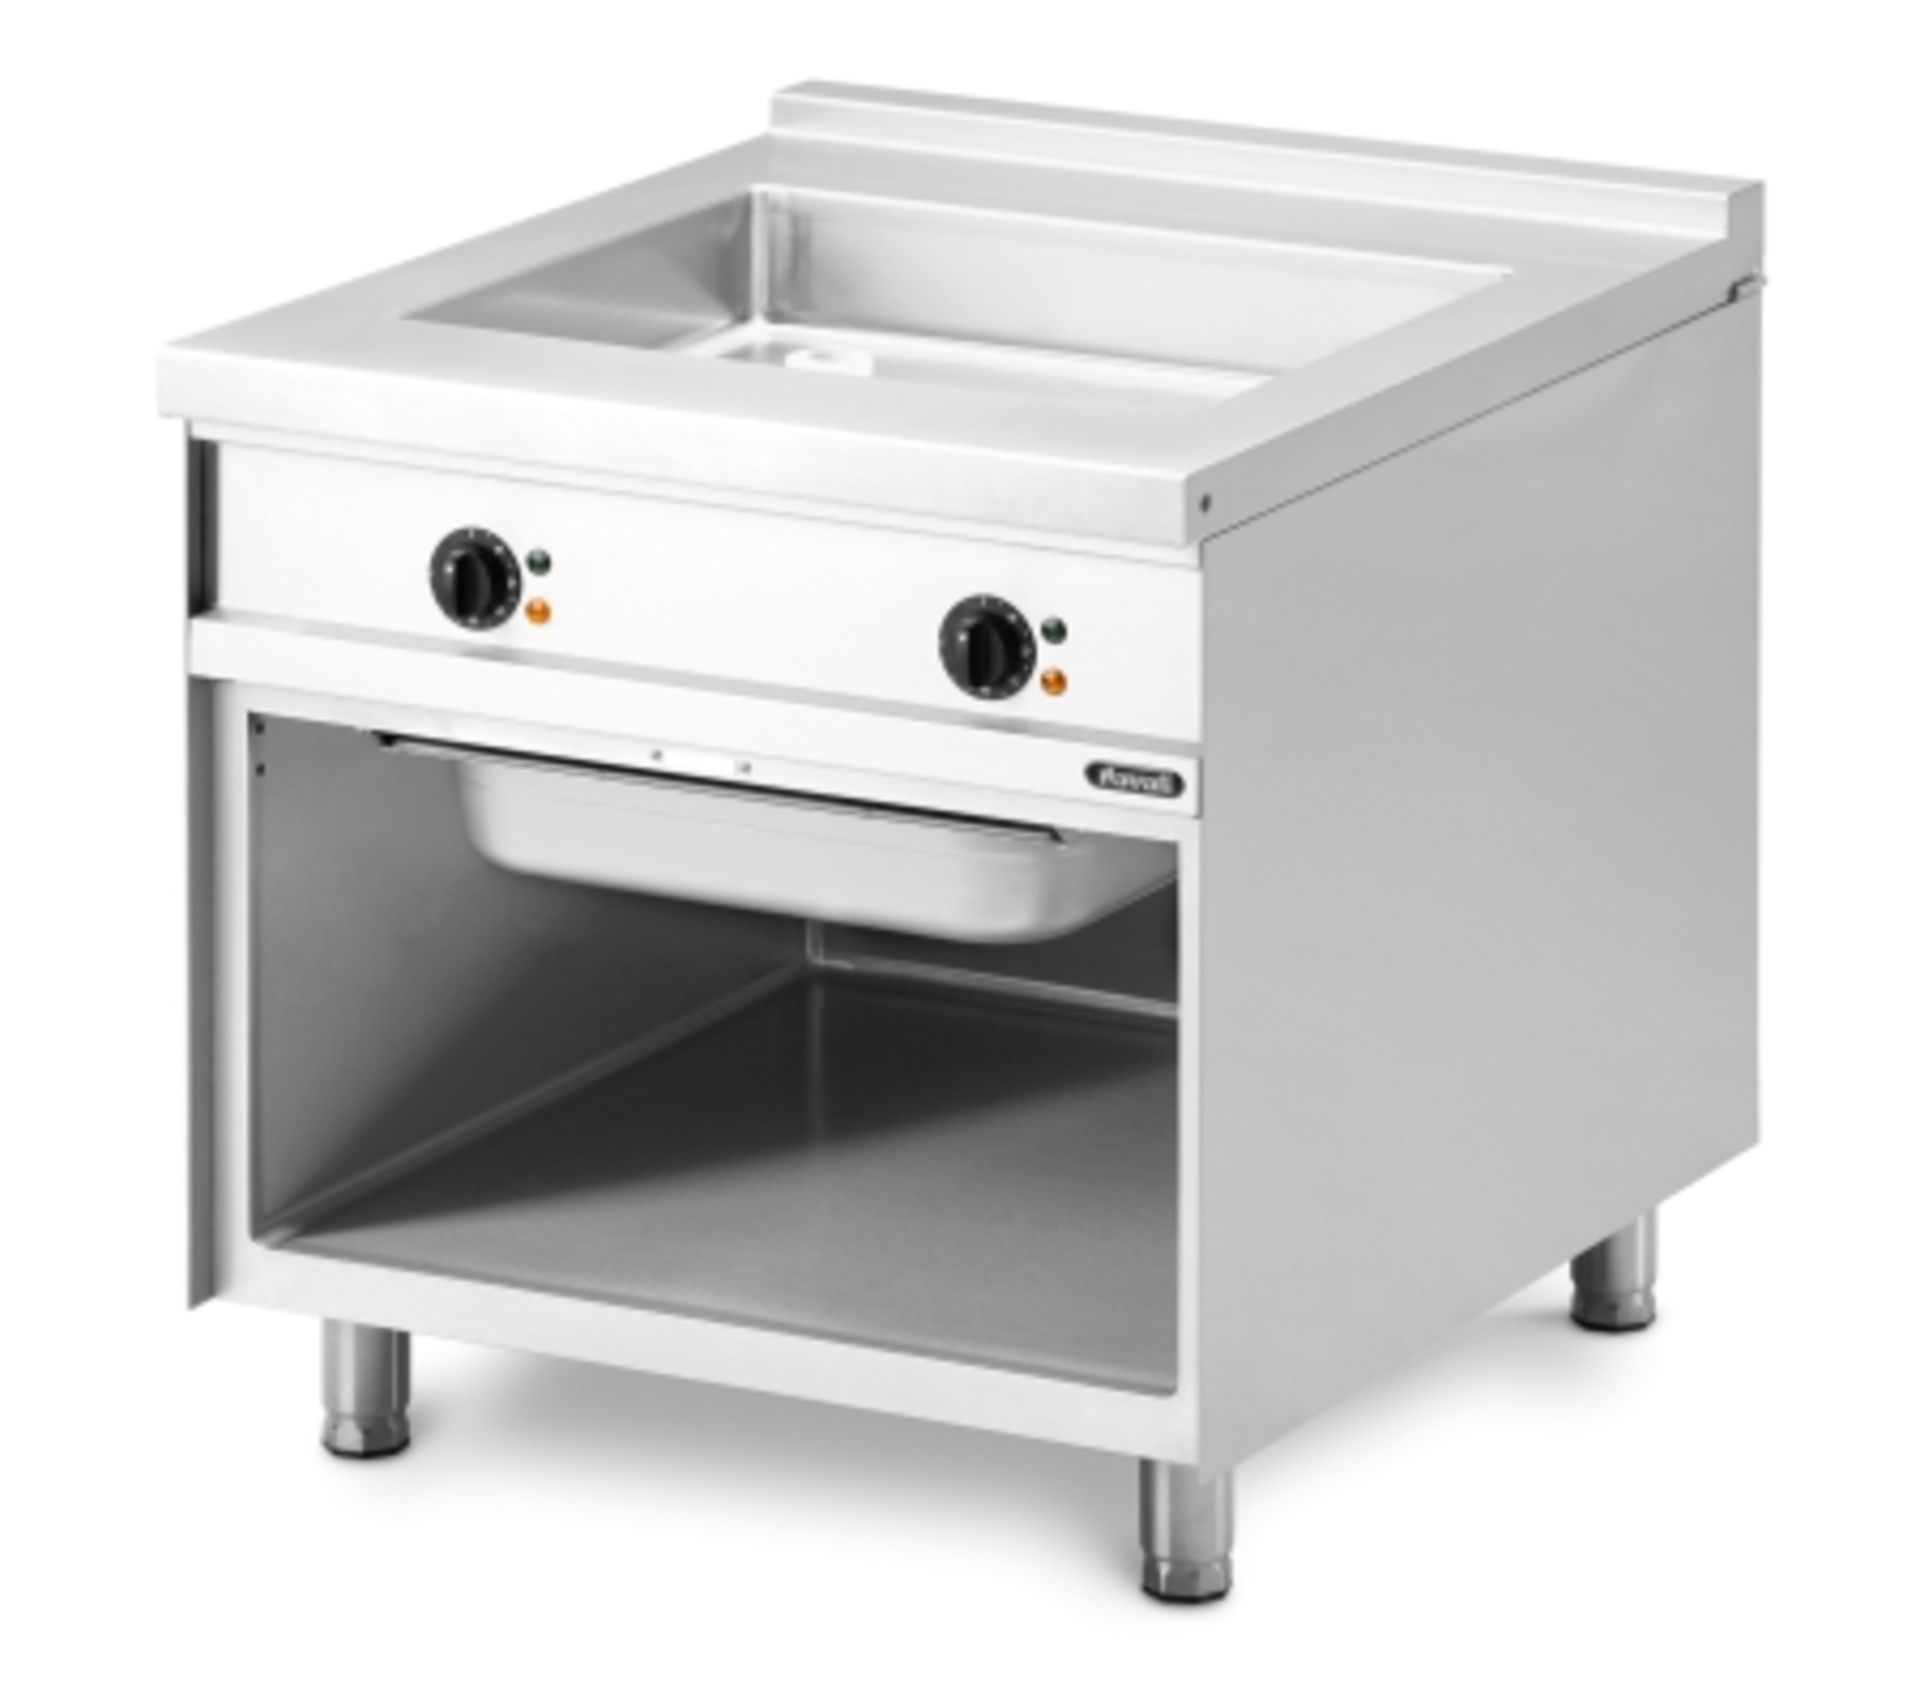 *Grandis 900 Griddle Pan, electric, stand-alone or suite, 1/1 GN pan capacity, manual controls, 50°C